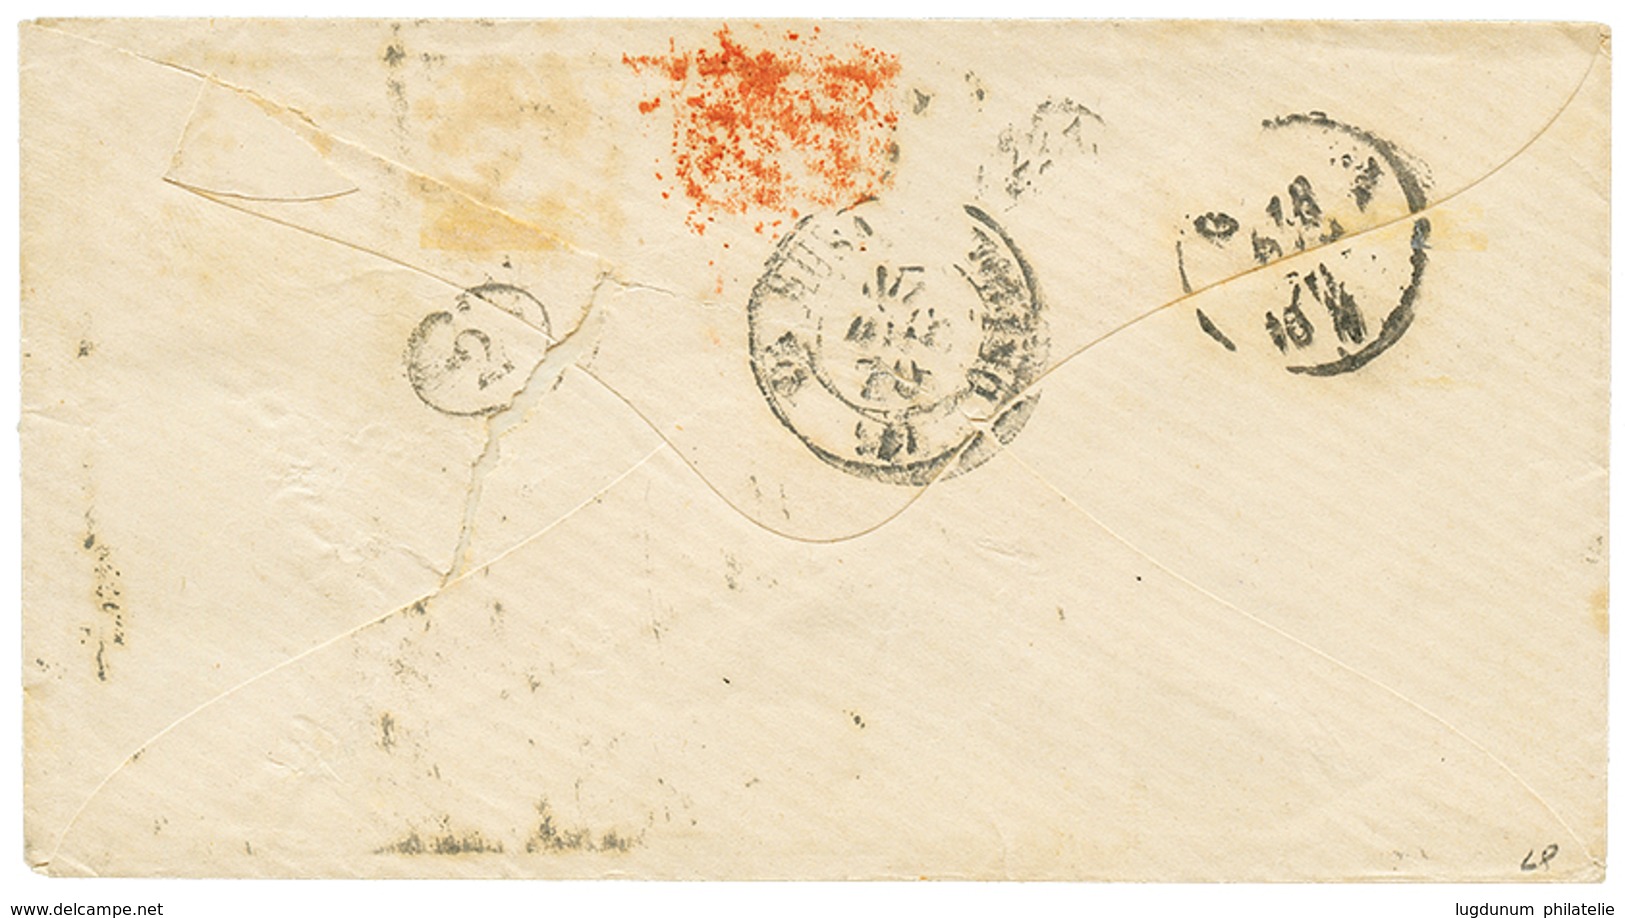 1202 1870 50R + 100R Canc. 1 + LISBOA On Envelope To GENOVA (ITALY). Vf. - Other & Unclassified